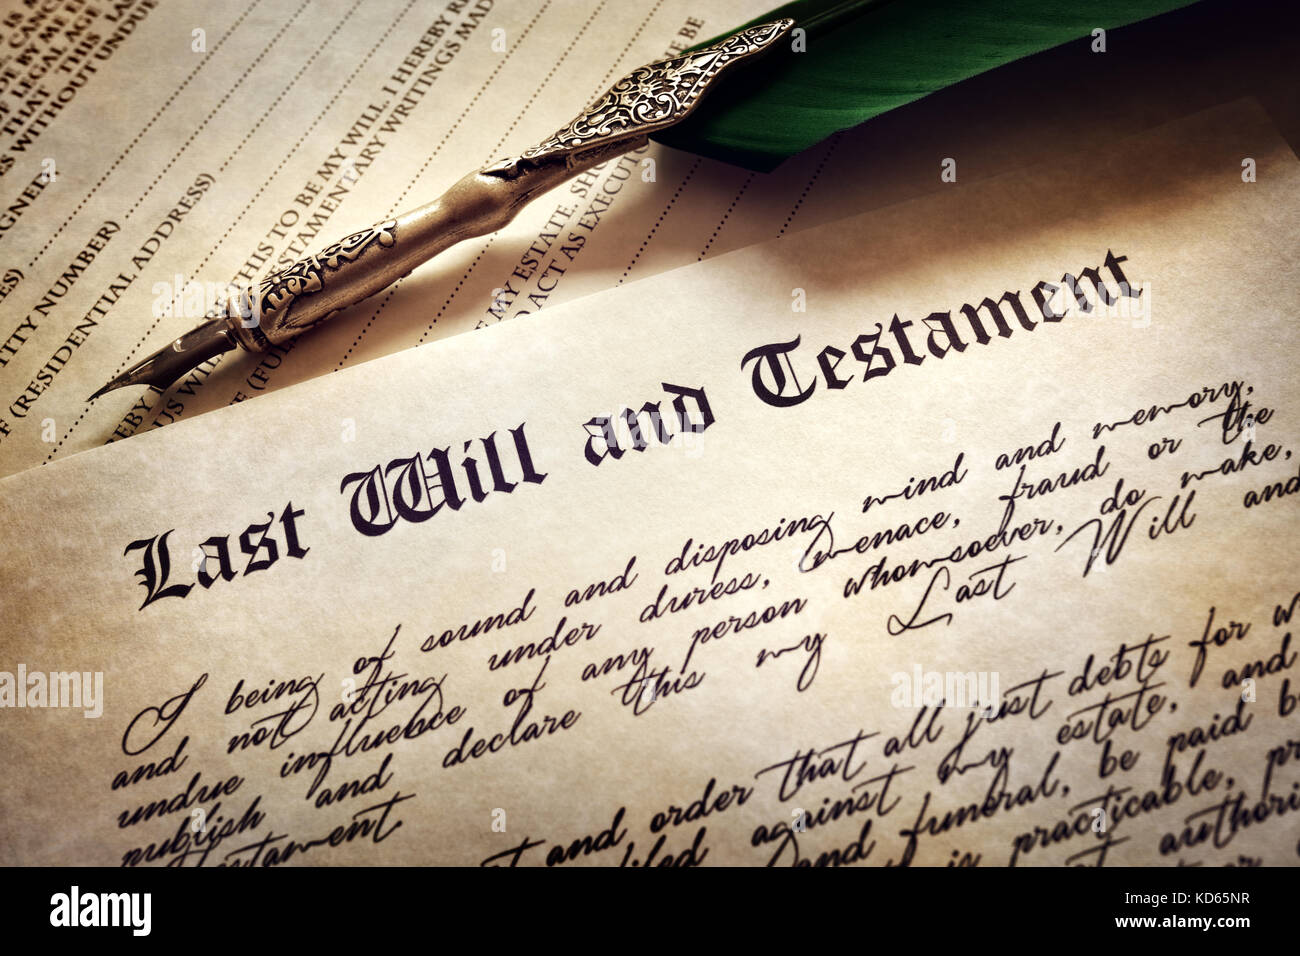 Last Will and Testament document with quill pen and handwriting Stock Photo